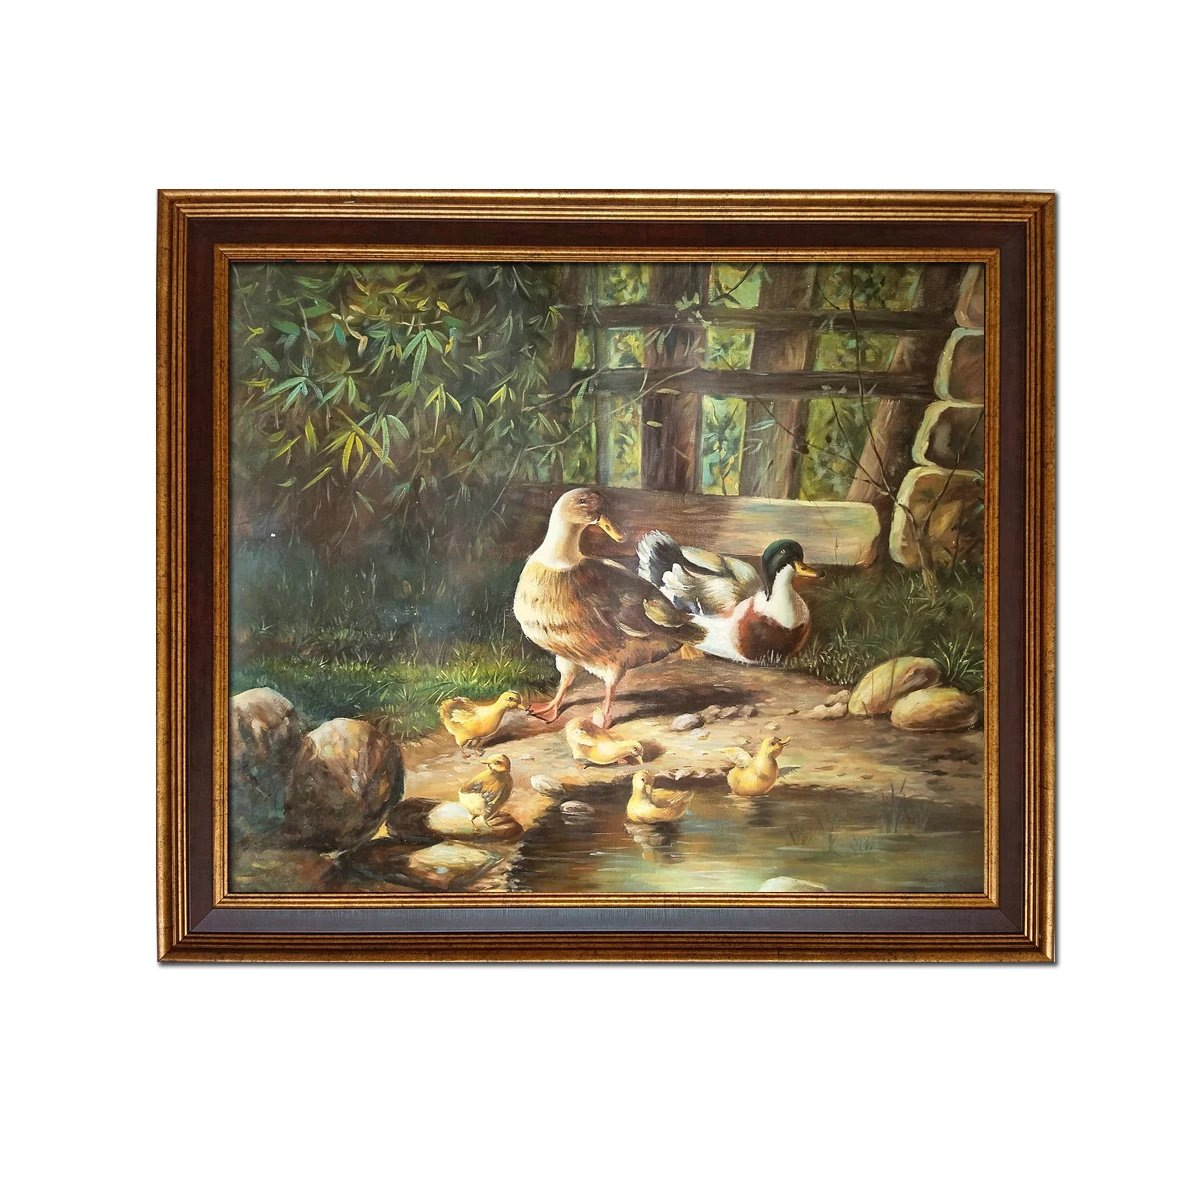 

Golden Framed-High Quality Handpainted Classical Animal Duck Oil Painting on Canvas Wall Art Decor 20x24inch